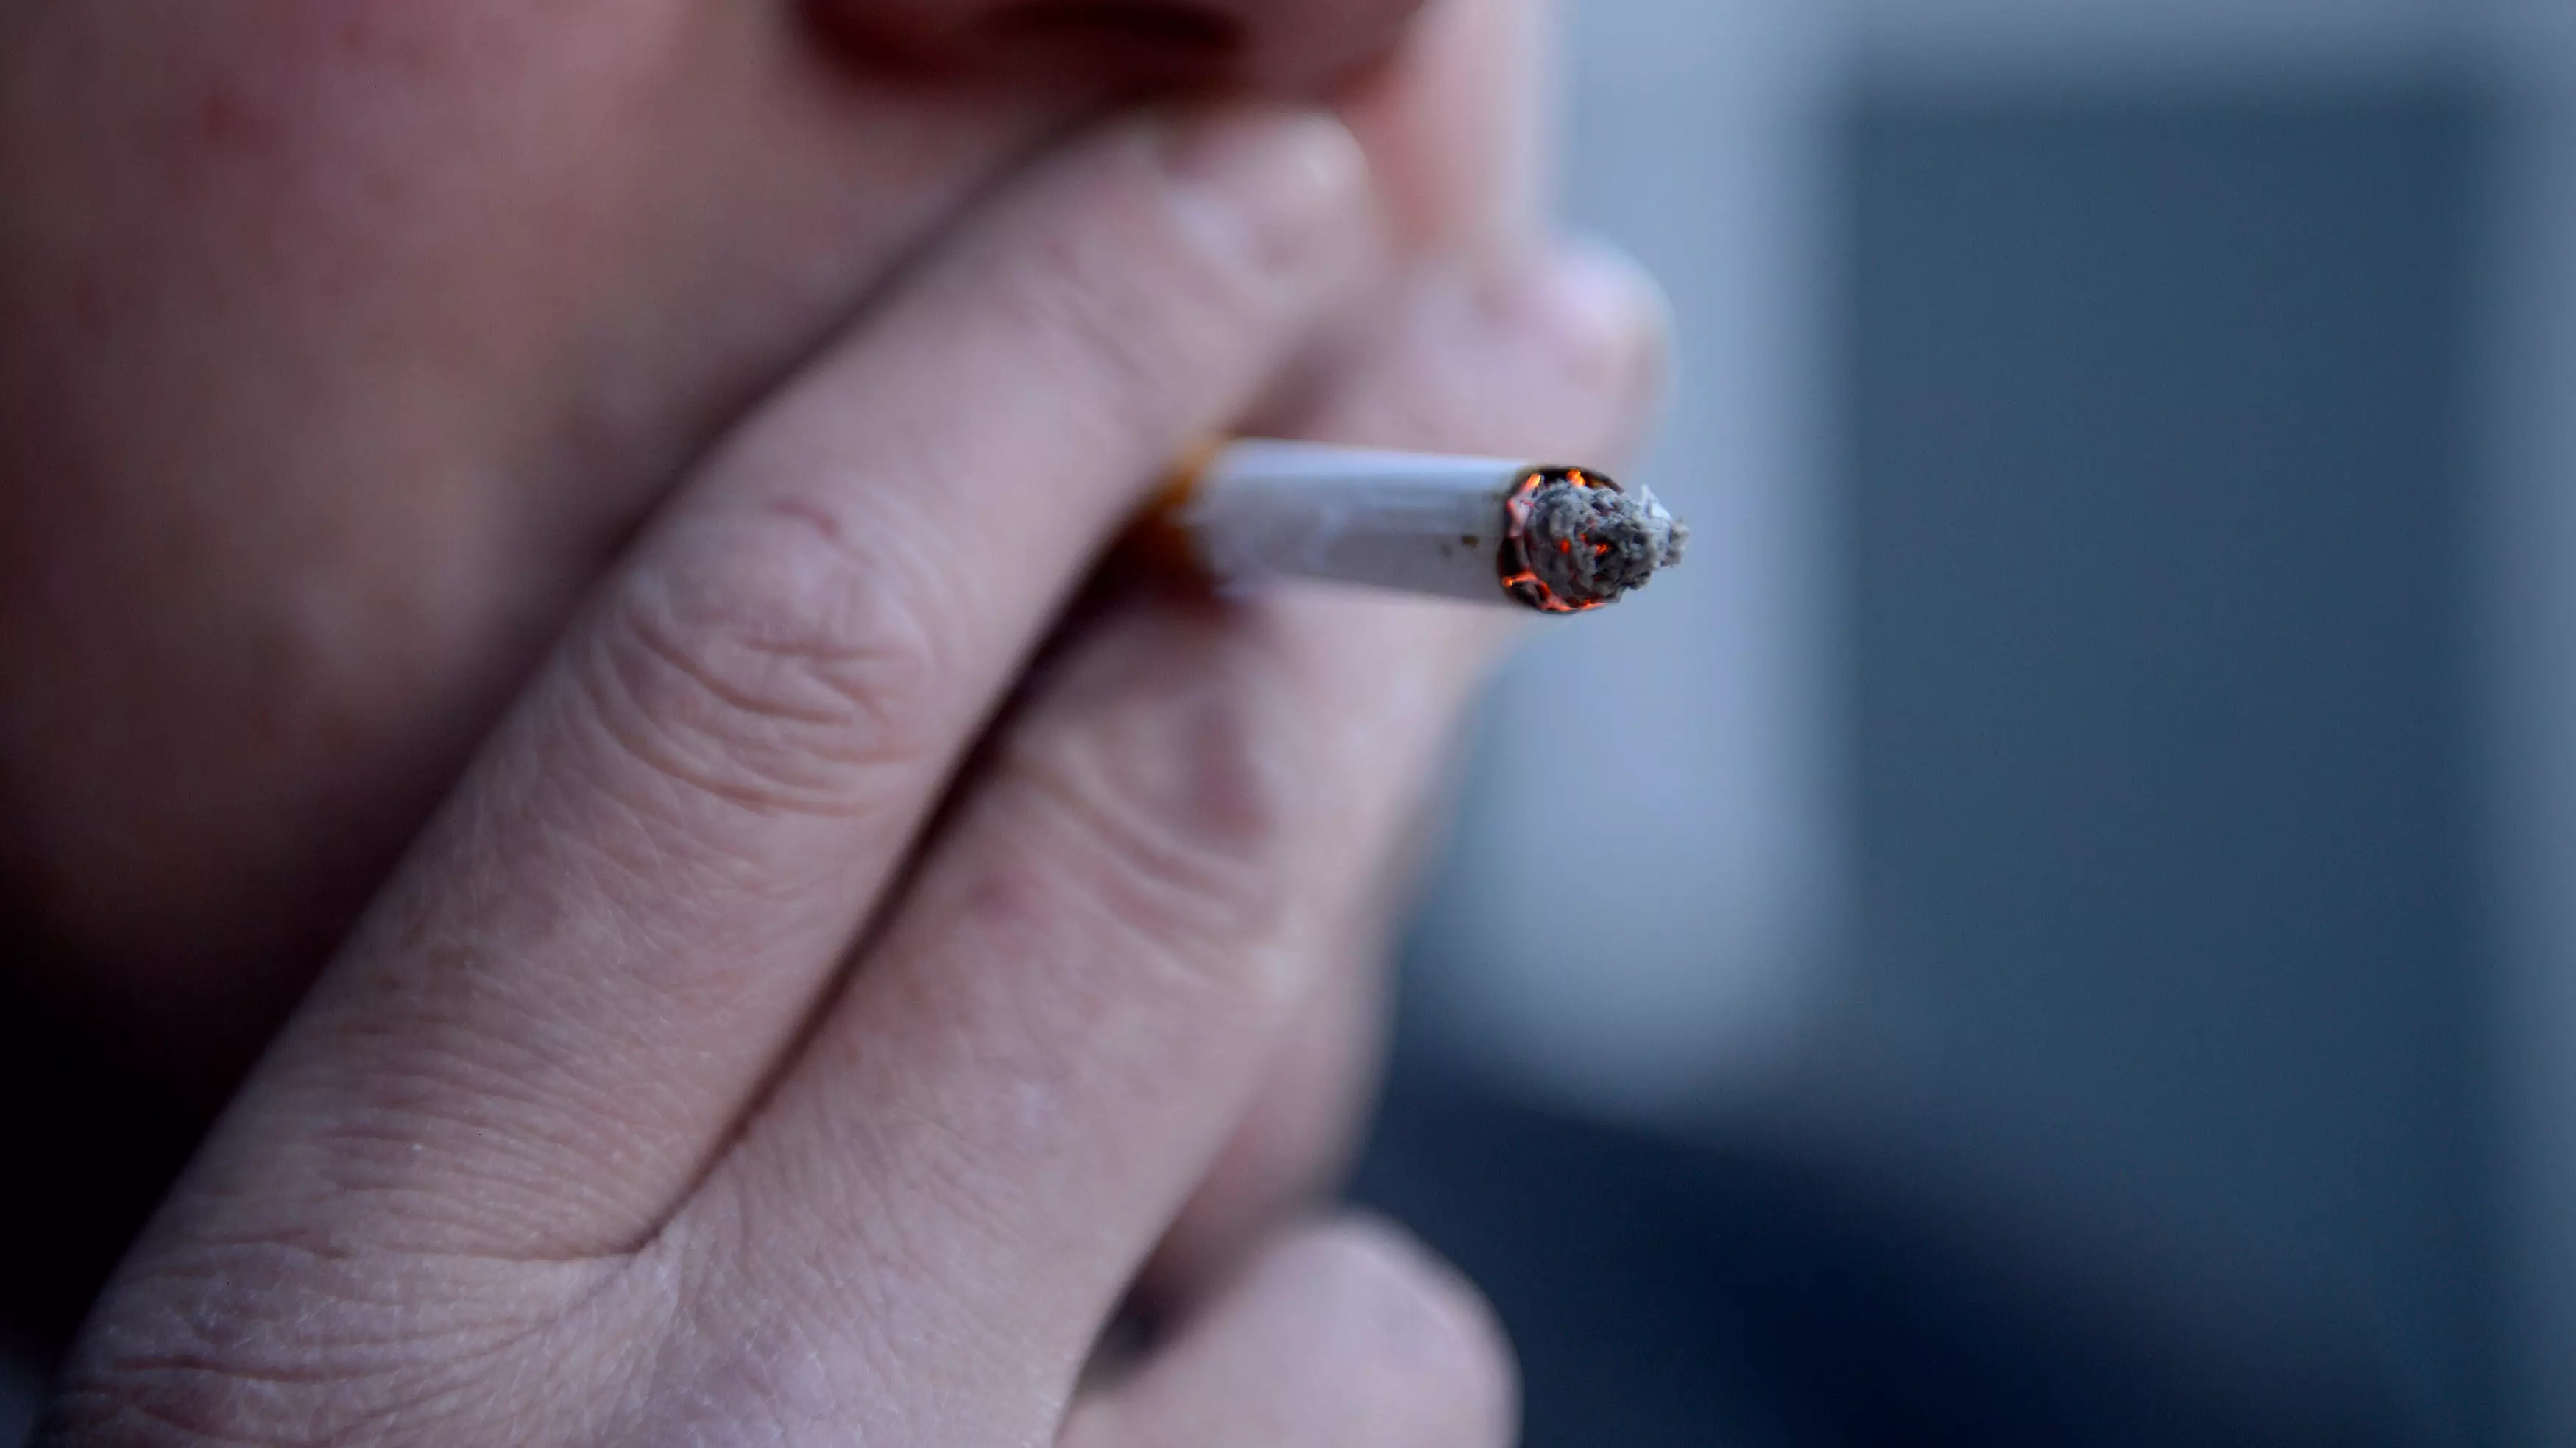 Heavy Smokers Who Quit Have Better Lung Function Than Light Smokers